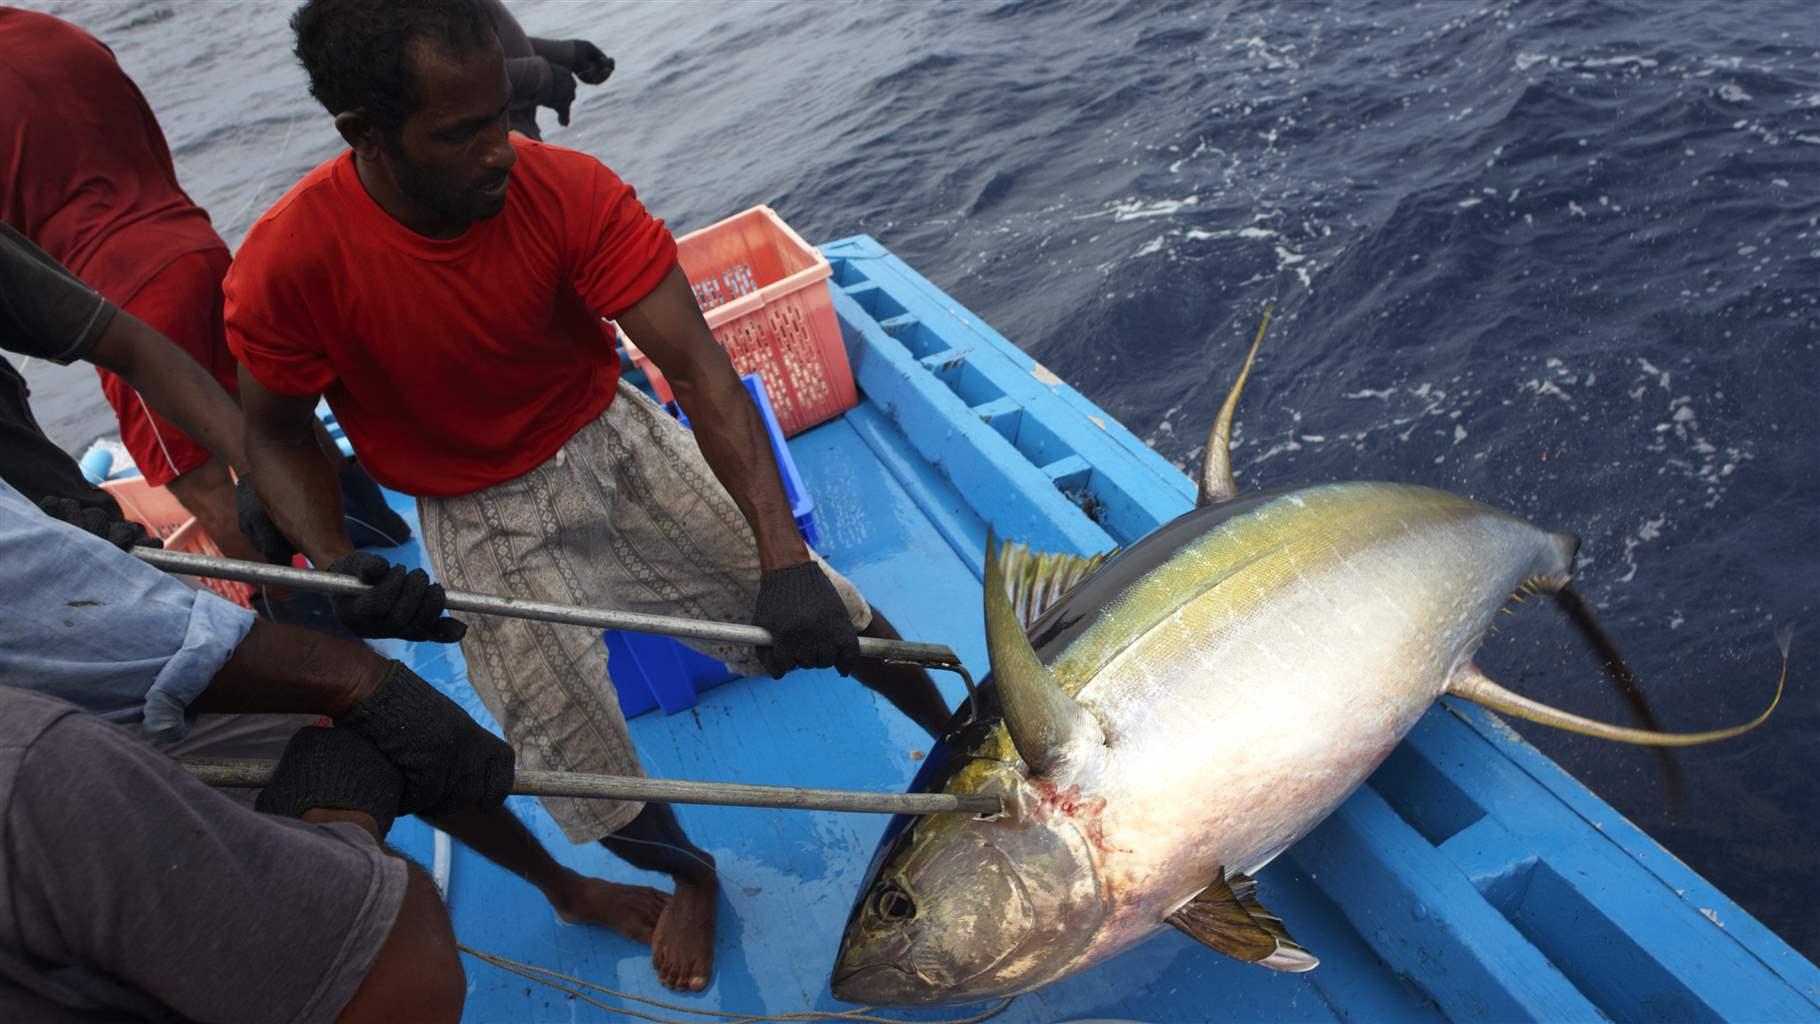 To Improve Indian Ocean Tuna Sustainability, Managers Should Make